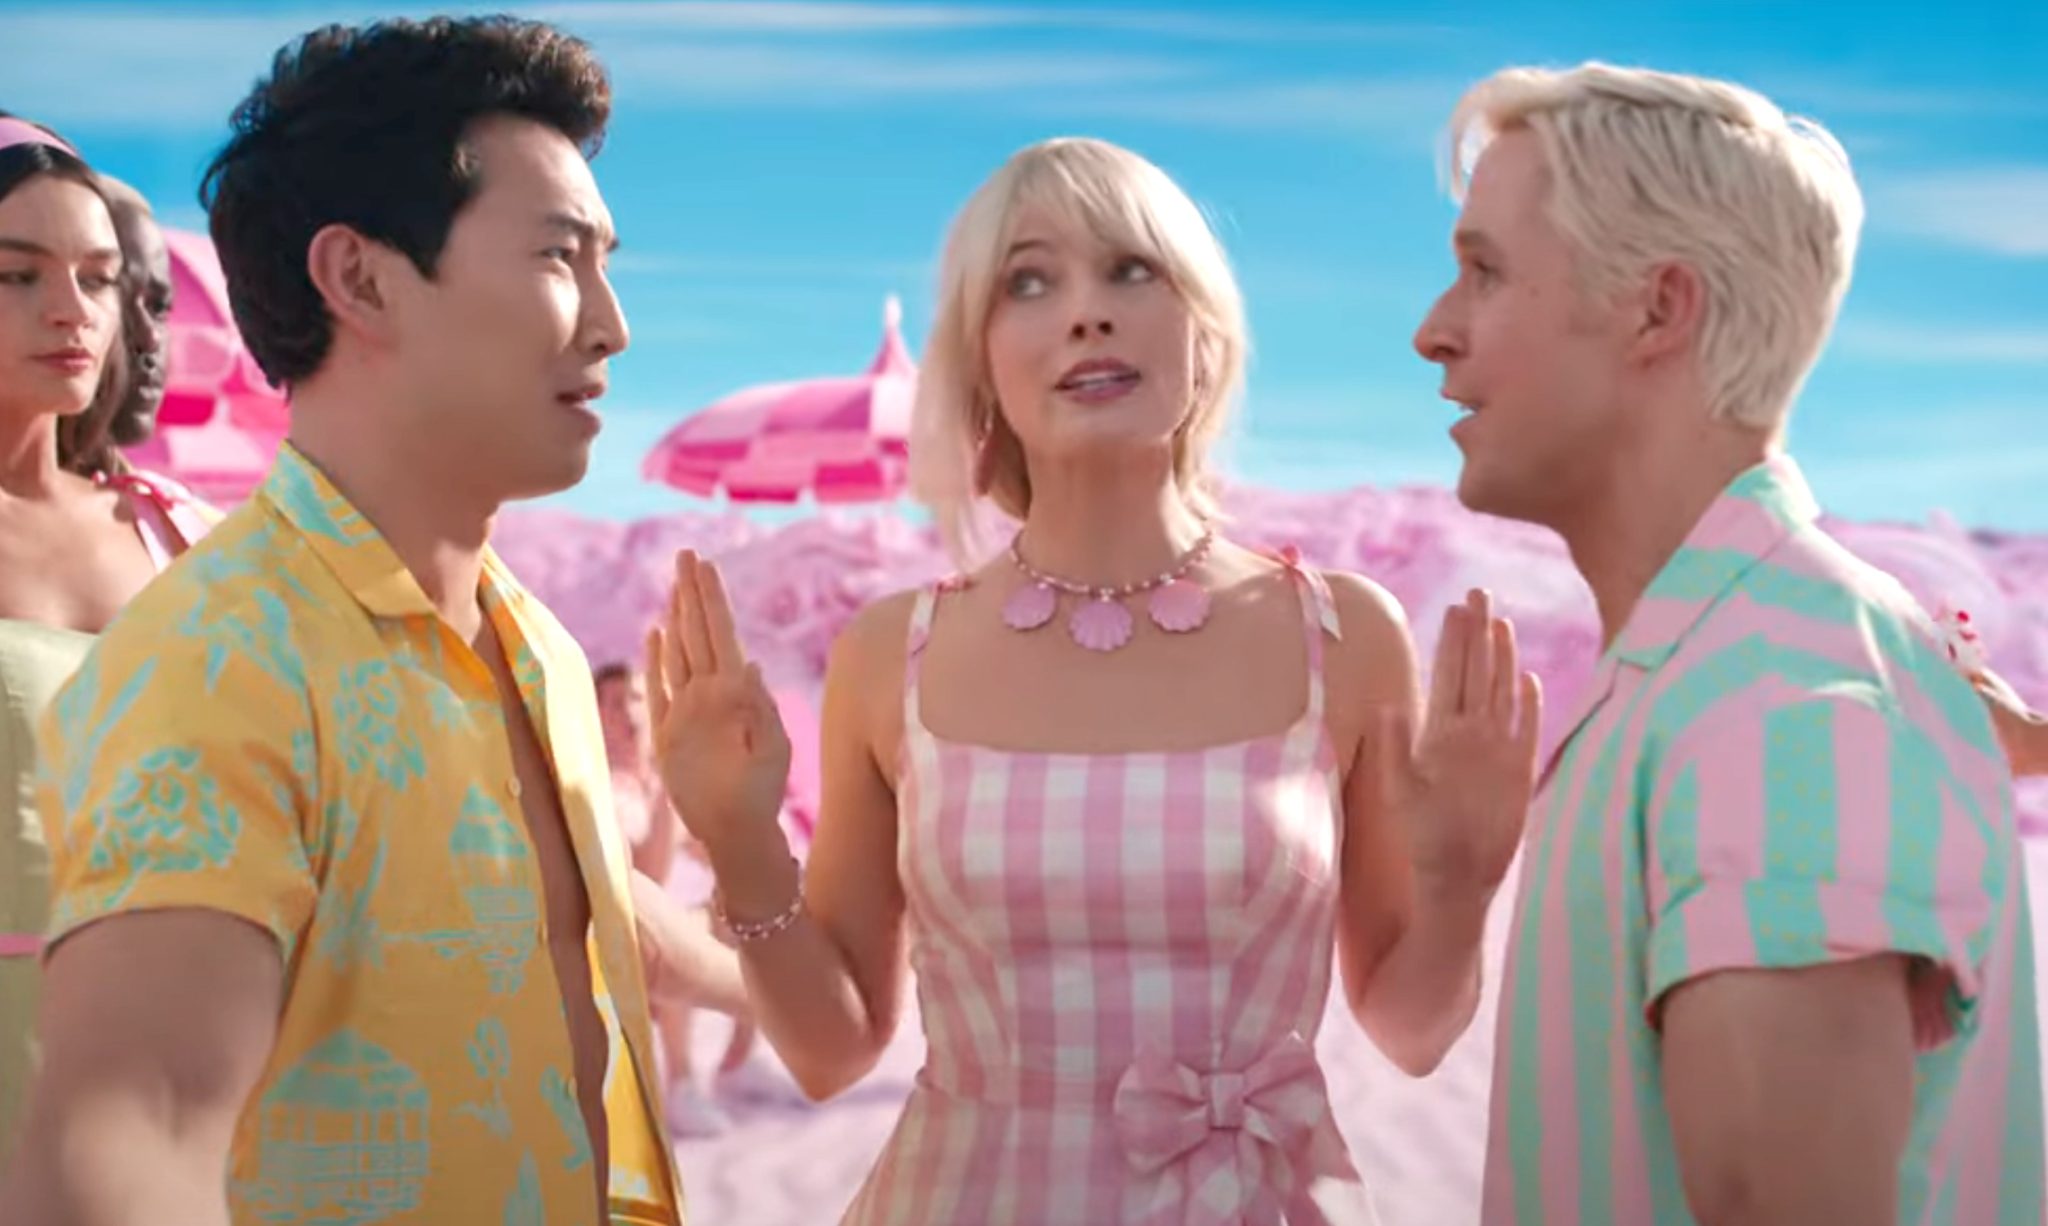 'Barbie' movie trailer gives first look at Mississauga's Simu Liu and ...